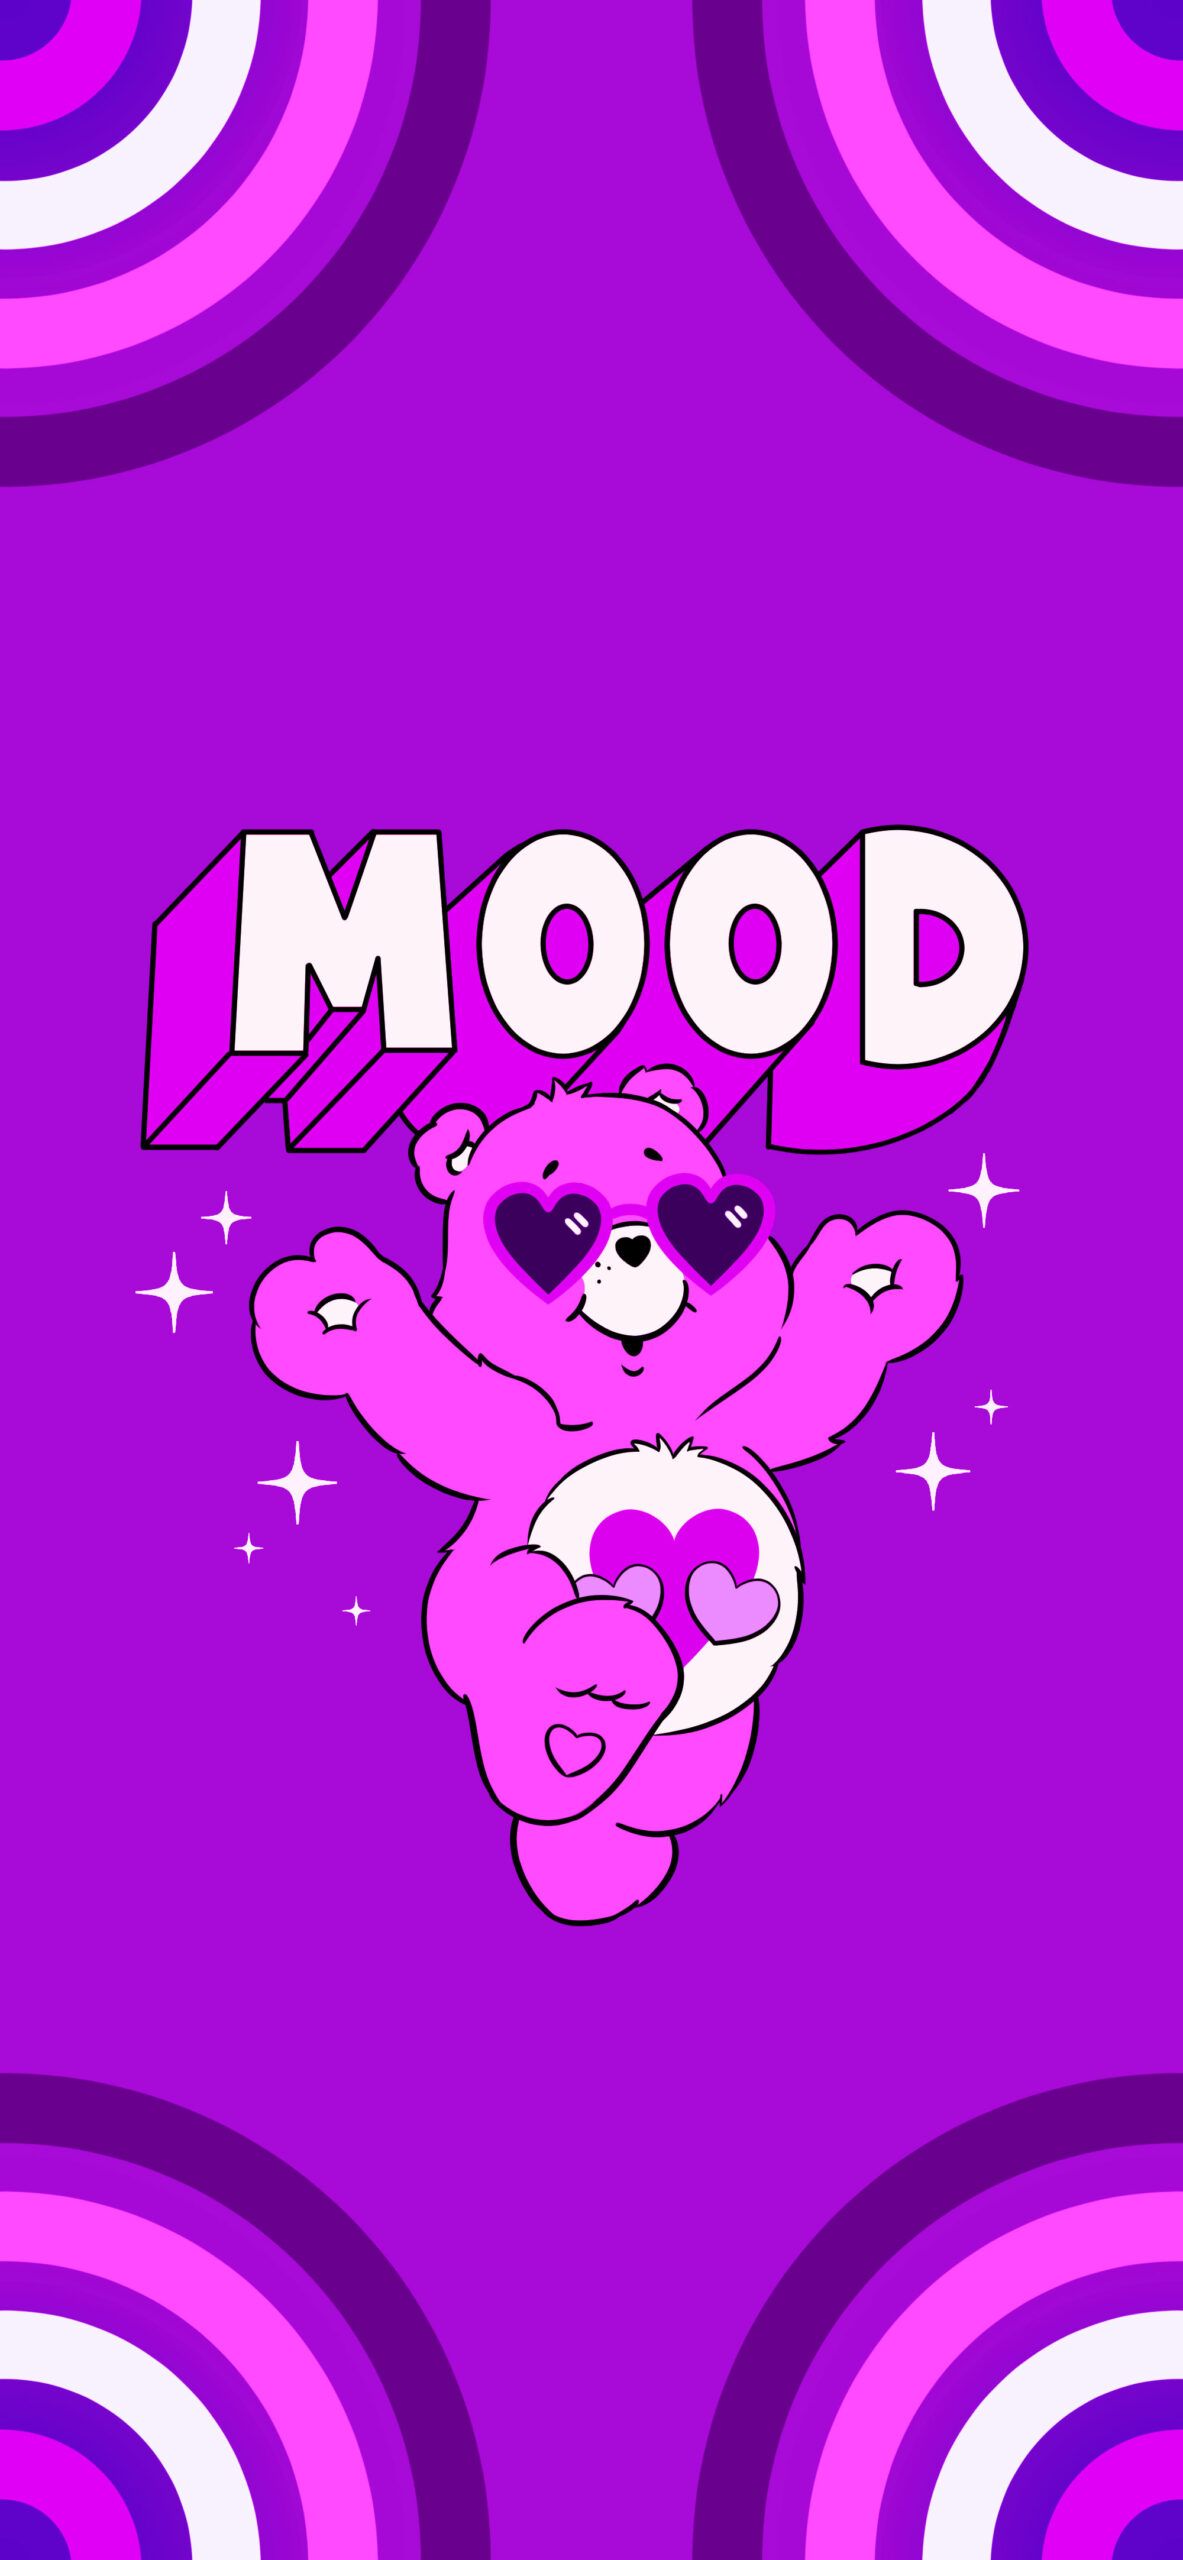 A purple Care Bear with the word MOOD above it - Love, Care Bears